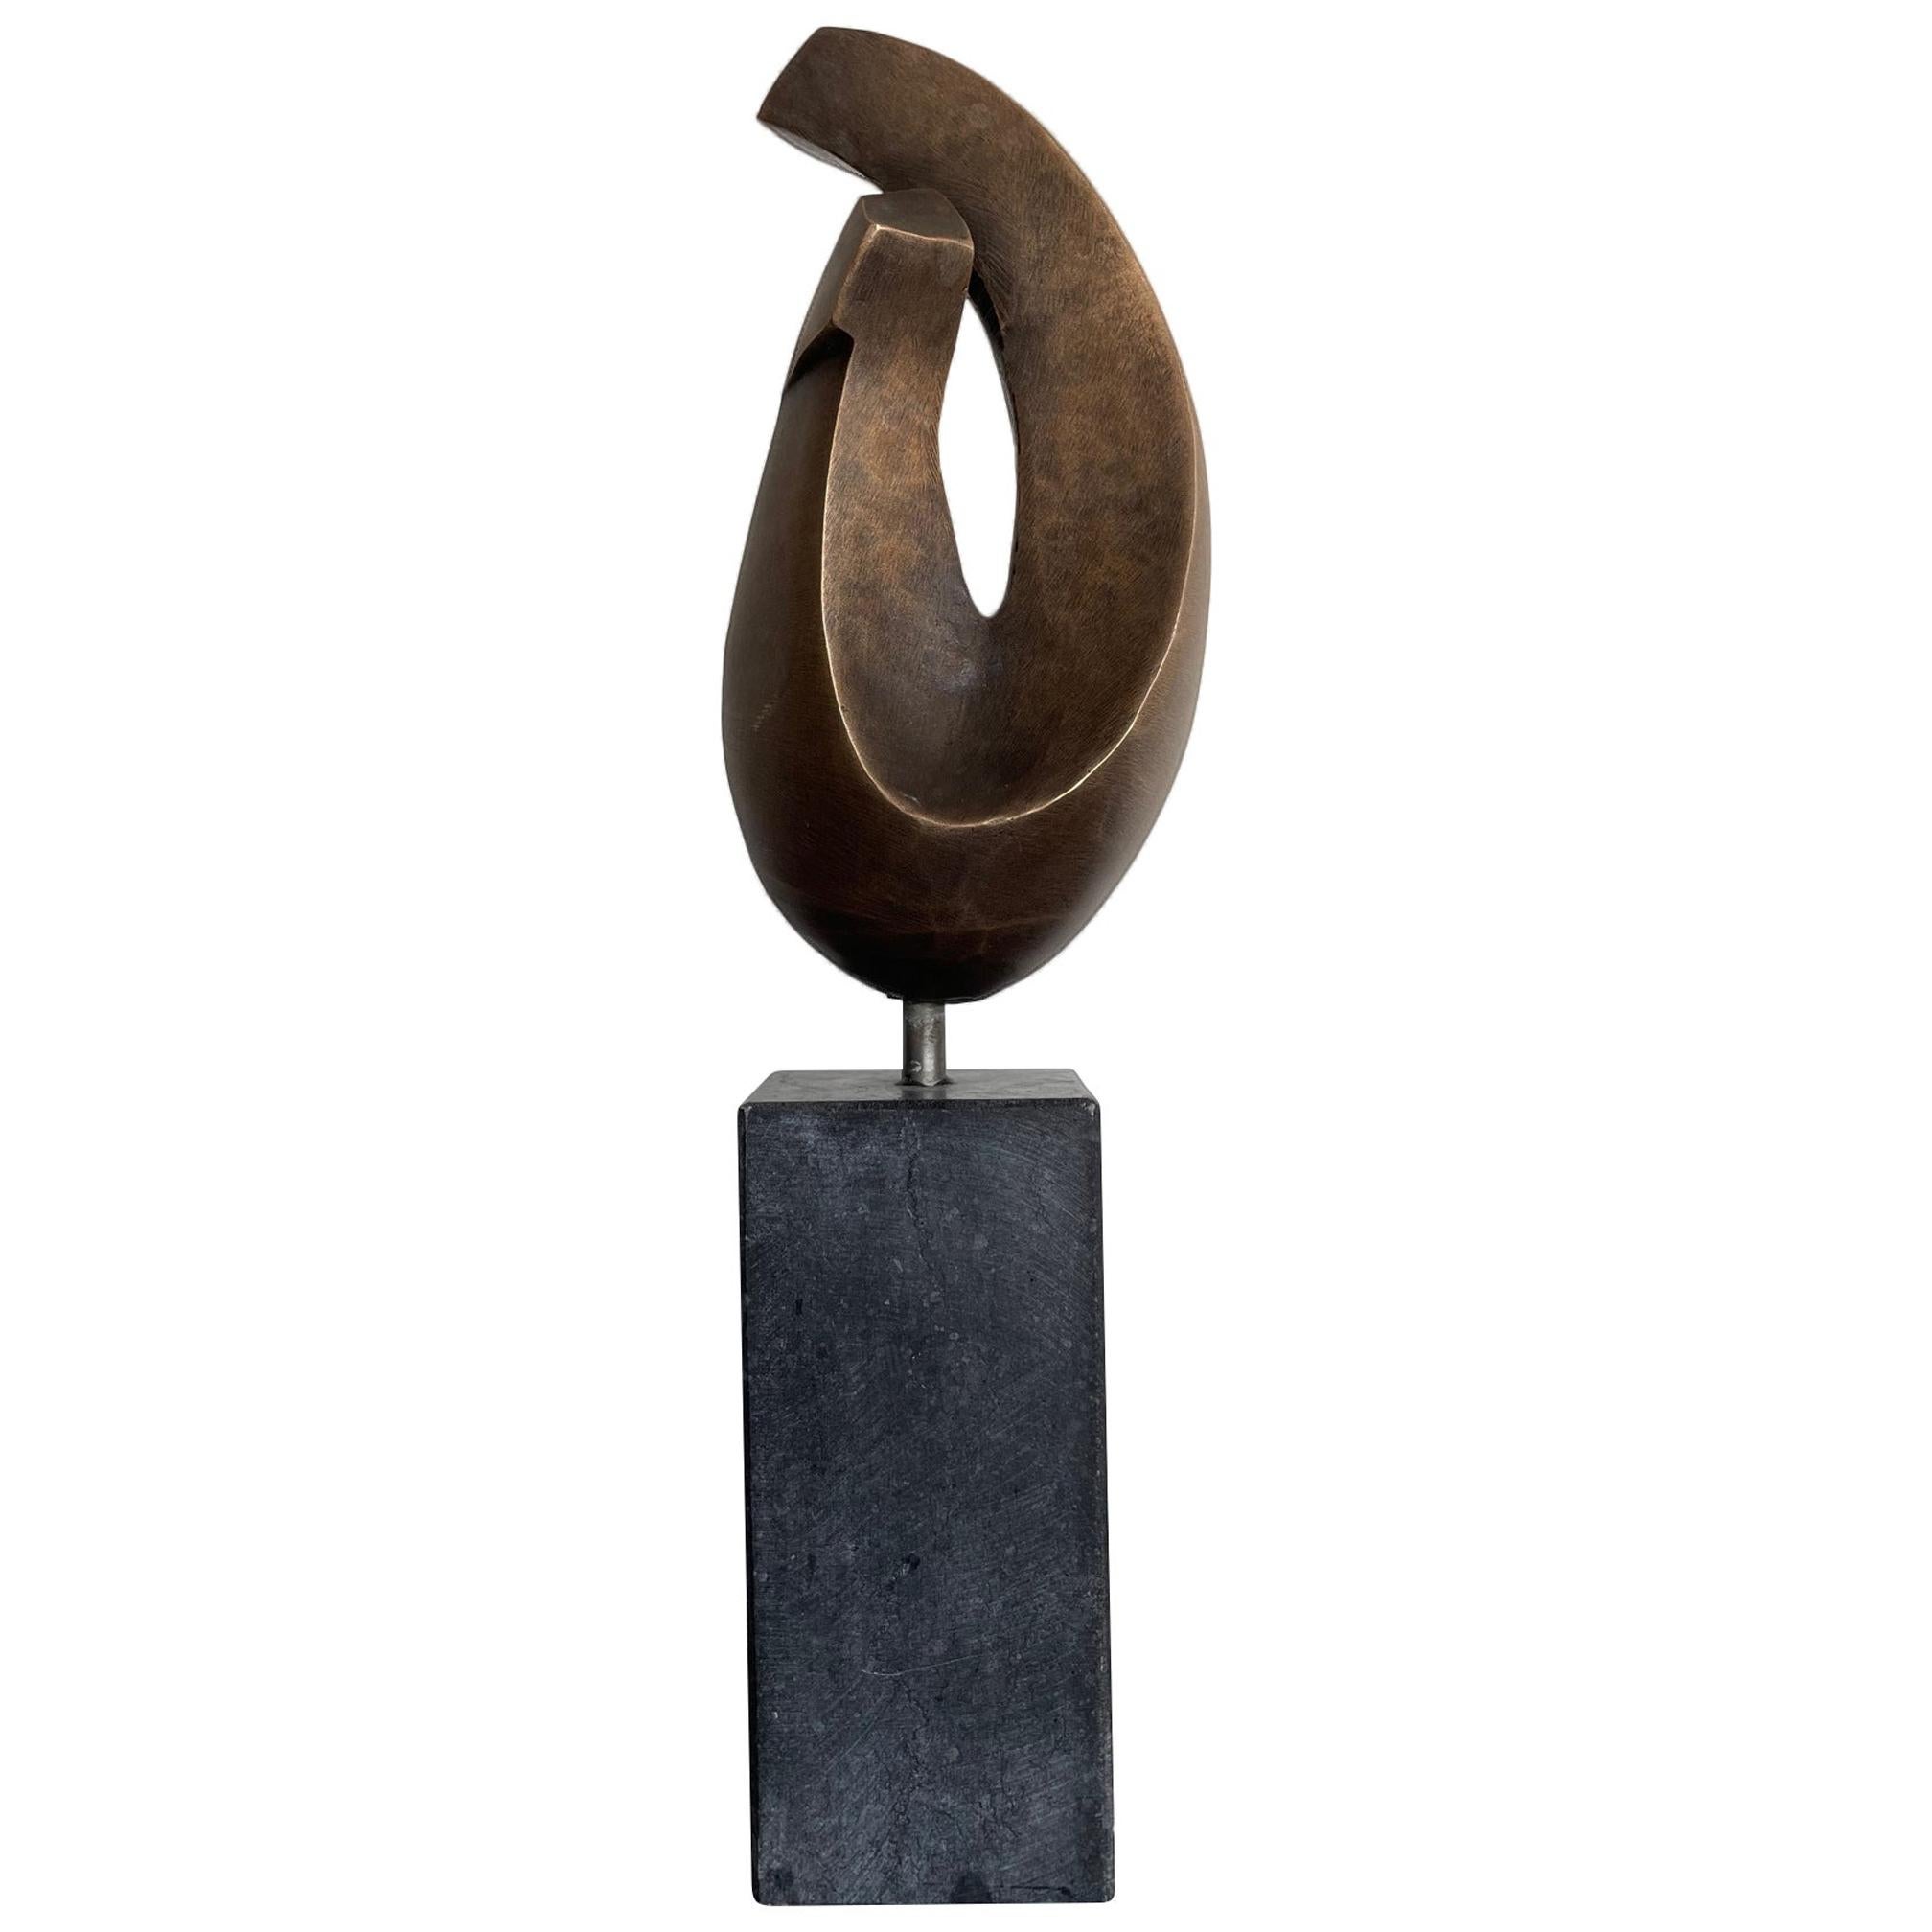 French Midcentury Abstract Bronze Sculpture Mounted on a Black Marble Plinth